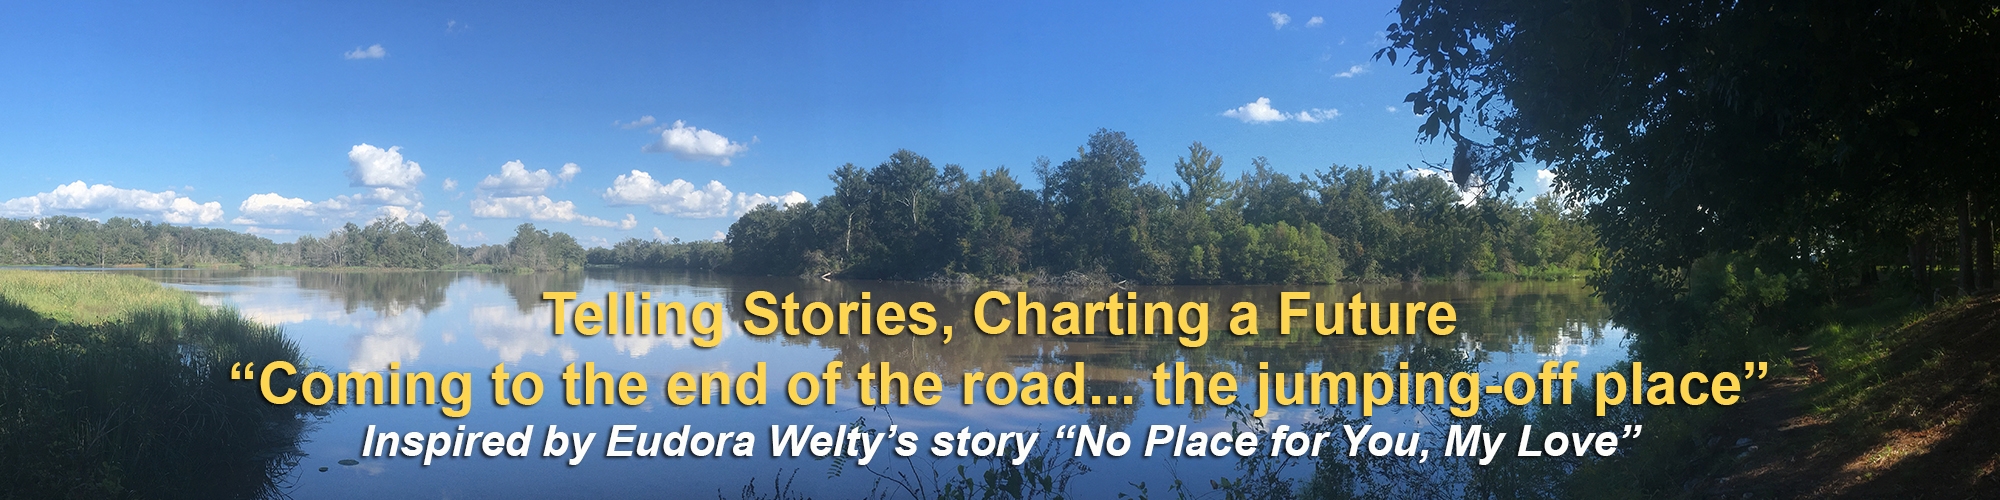 Telling Stories, Charting a Future "Coming to the end of the road... the jumping off place" Inspired by Eudora Welty's story "No Place for You, My Love"